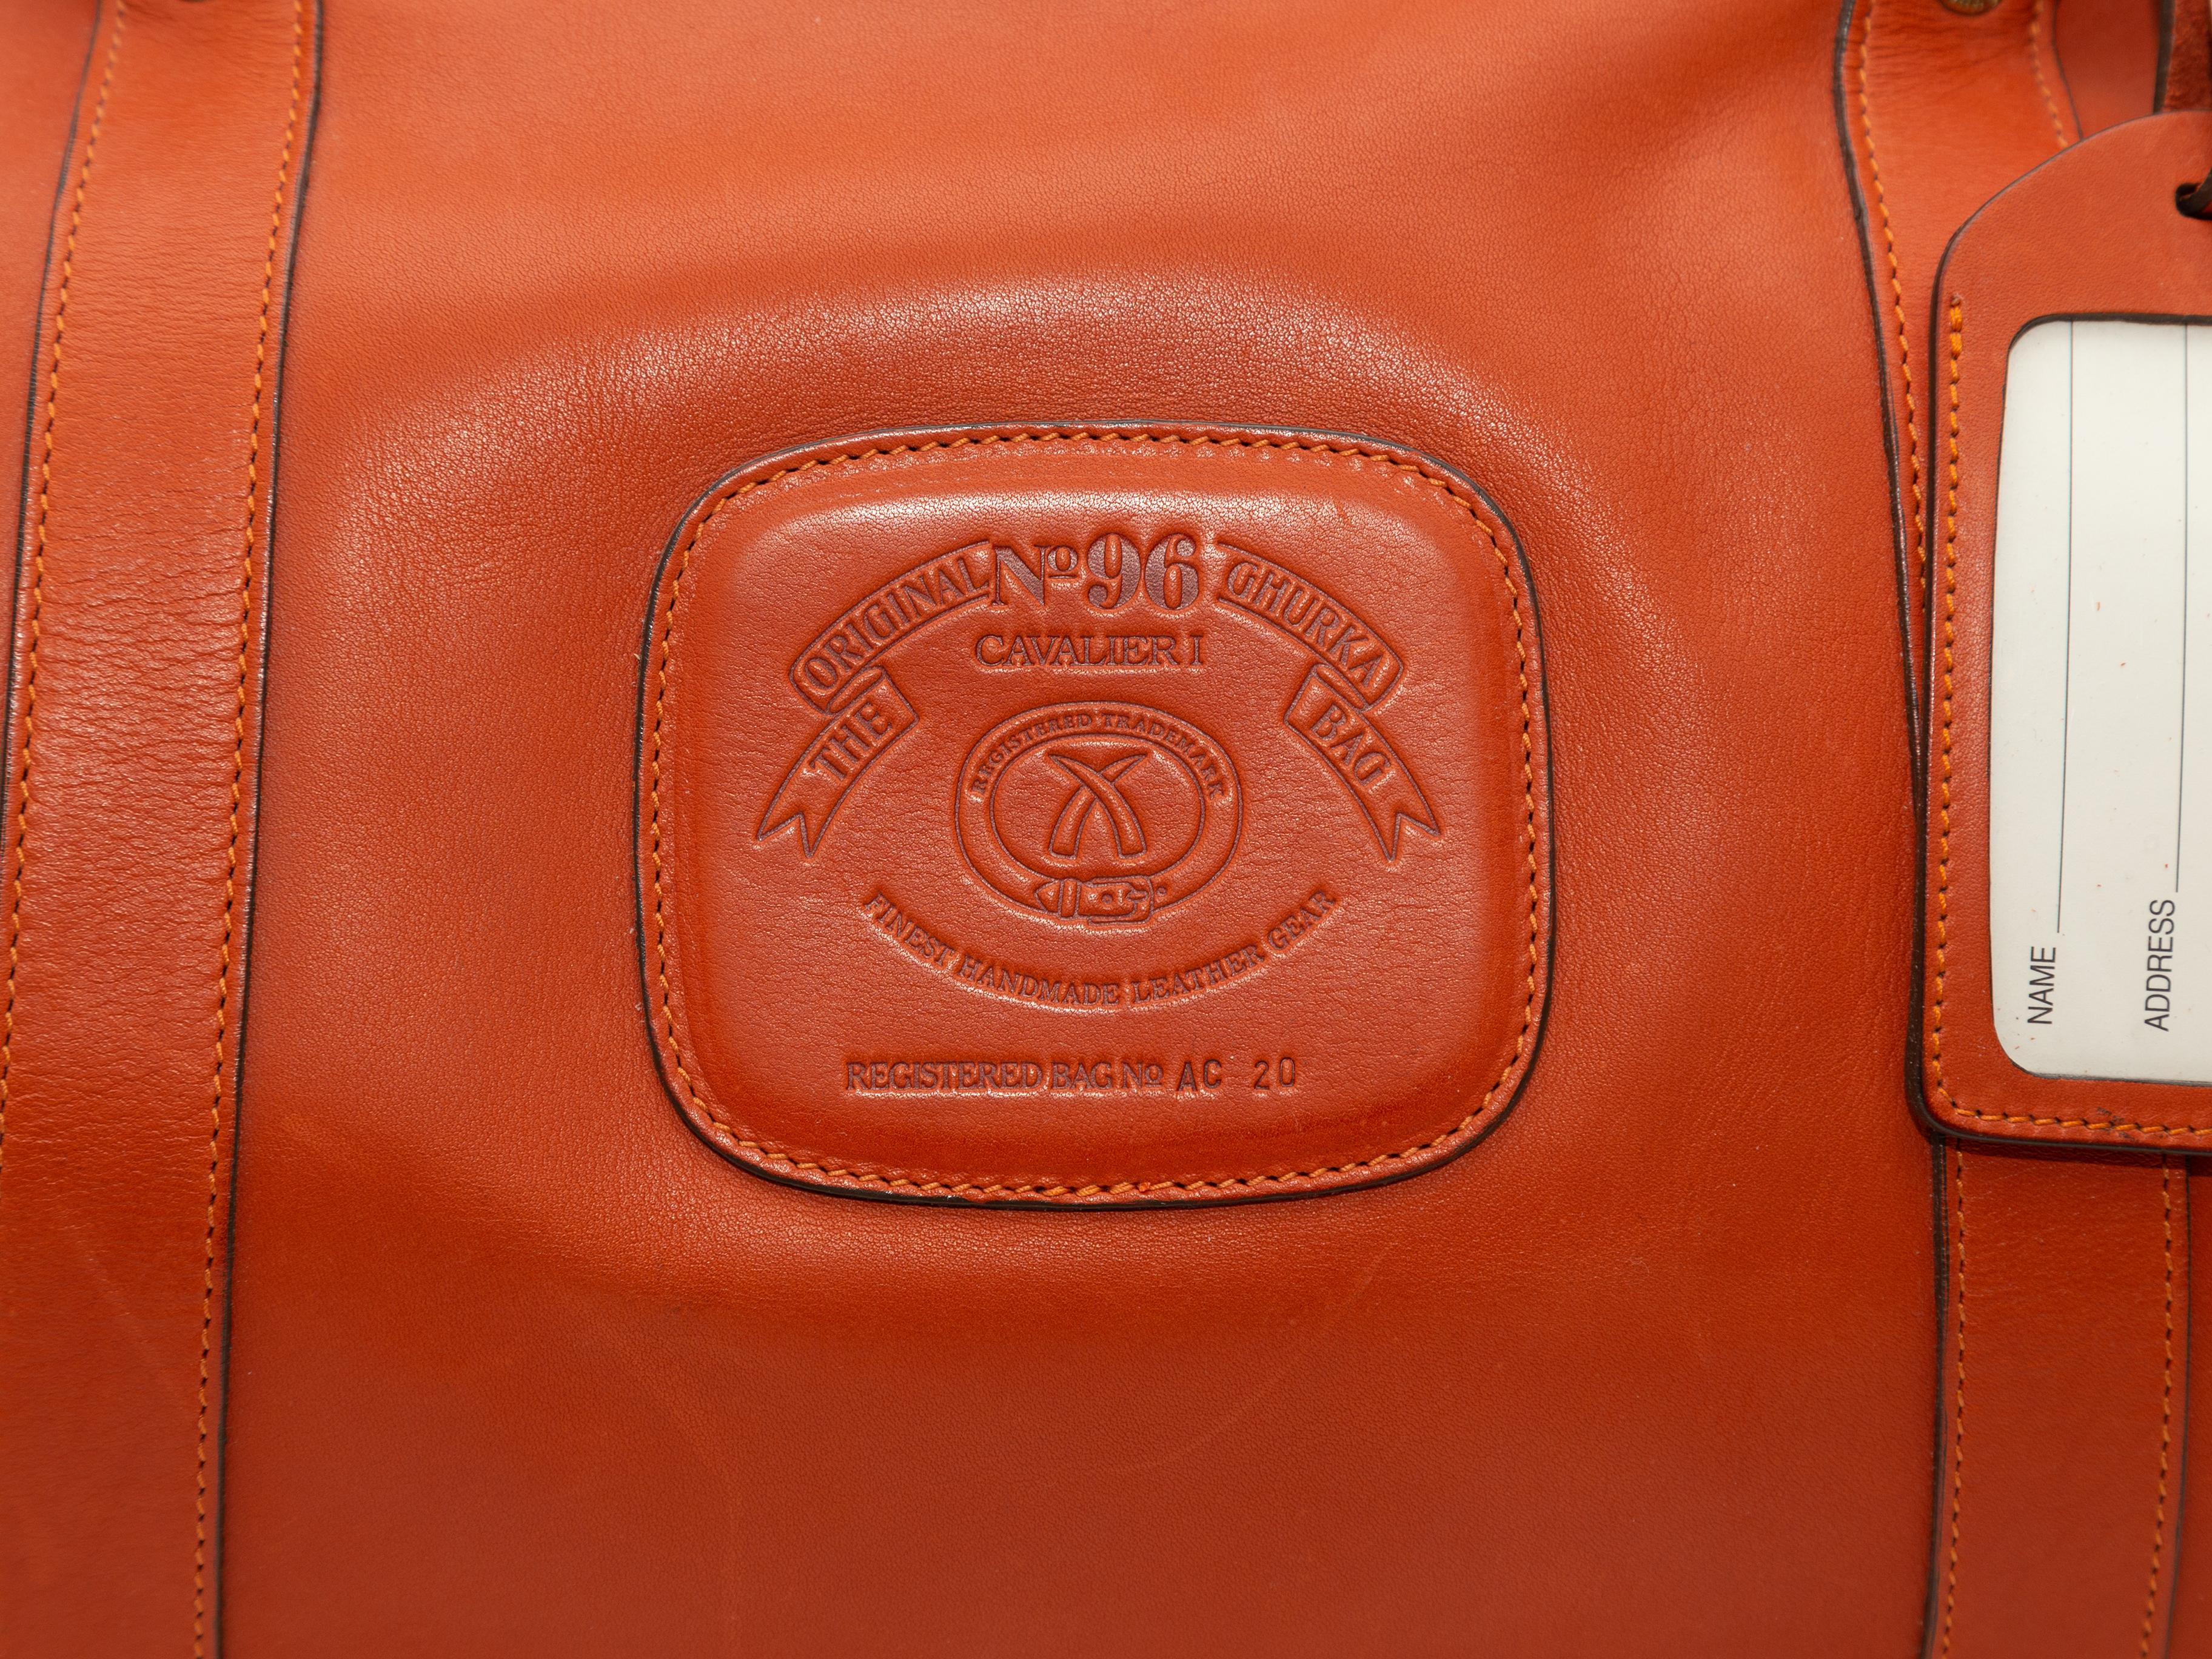 Product details: Orange leather No. 96 Cavalier Duffel Bag by Ghurka. Gold-tone hardware. Dual rolled top handles. Optional shoulder strap. Zip closure at top. 12